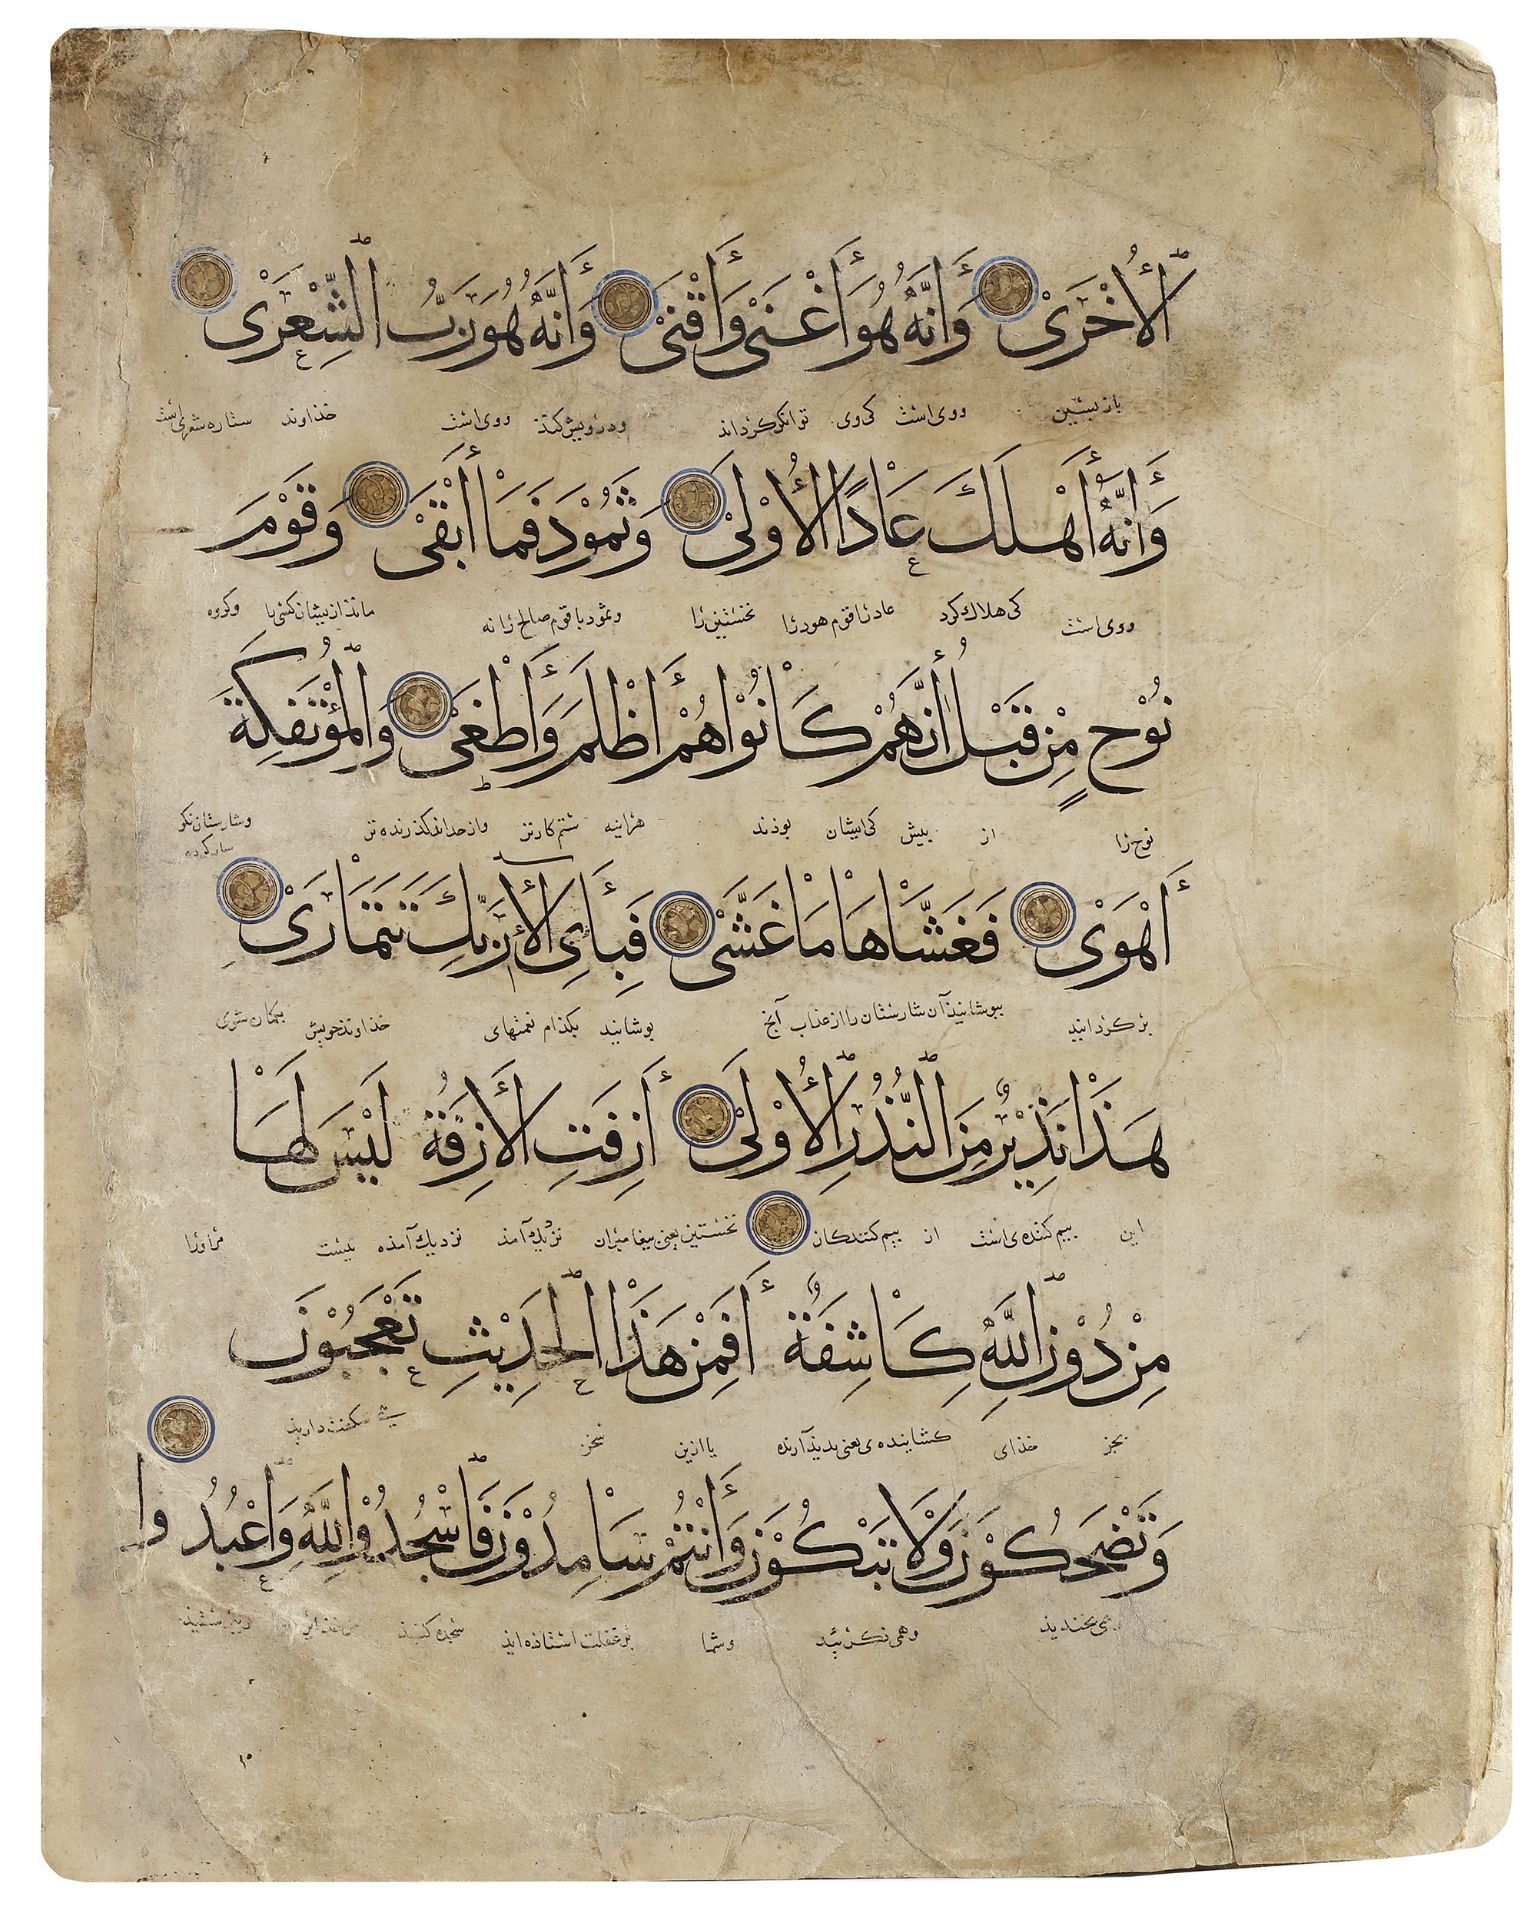 TWO LARGE MAMLUK QURAN PAGES, EGYPT, 13TH CENTURY - Image 3 of 3